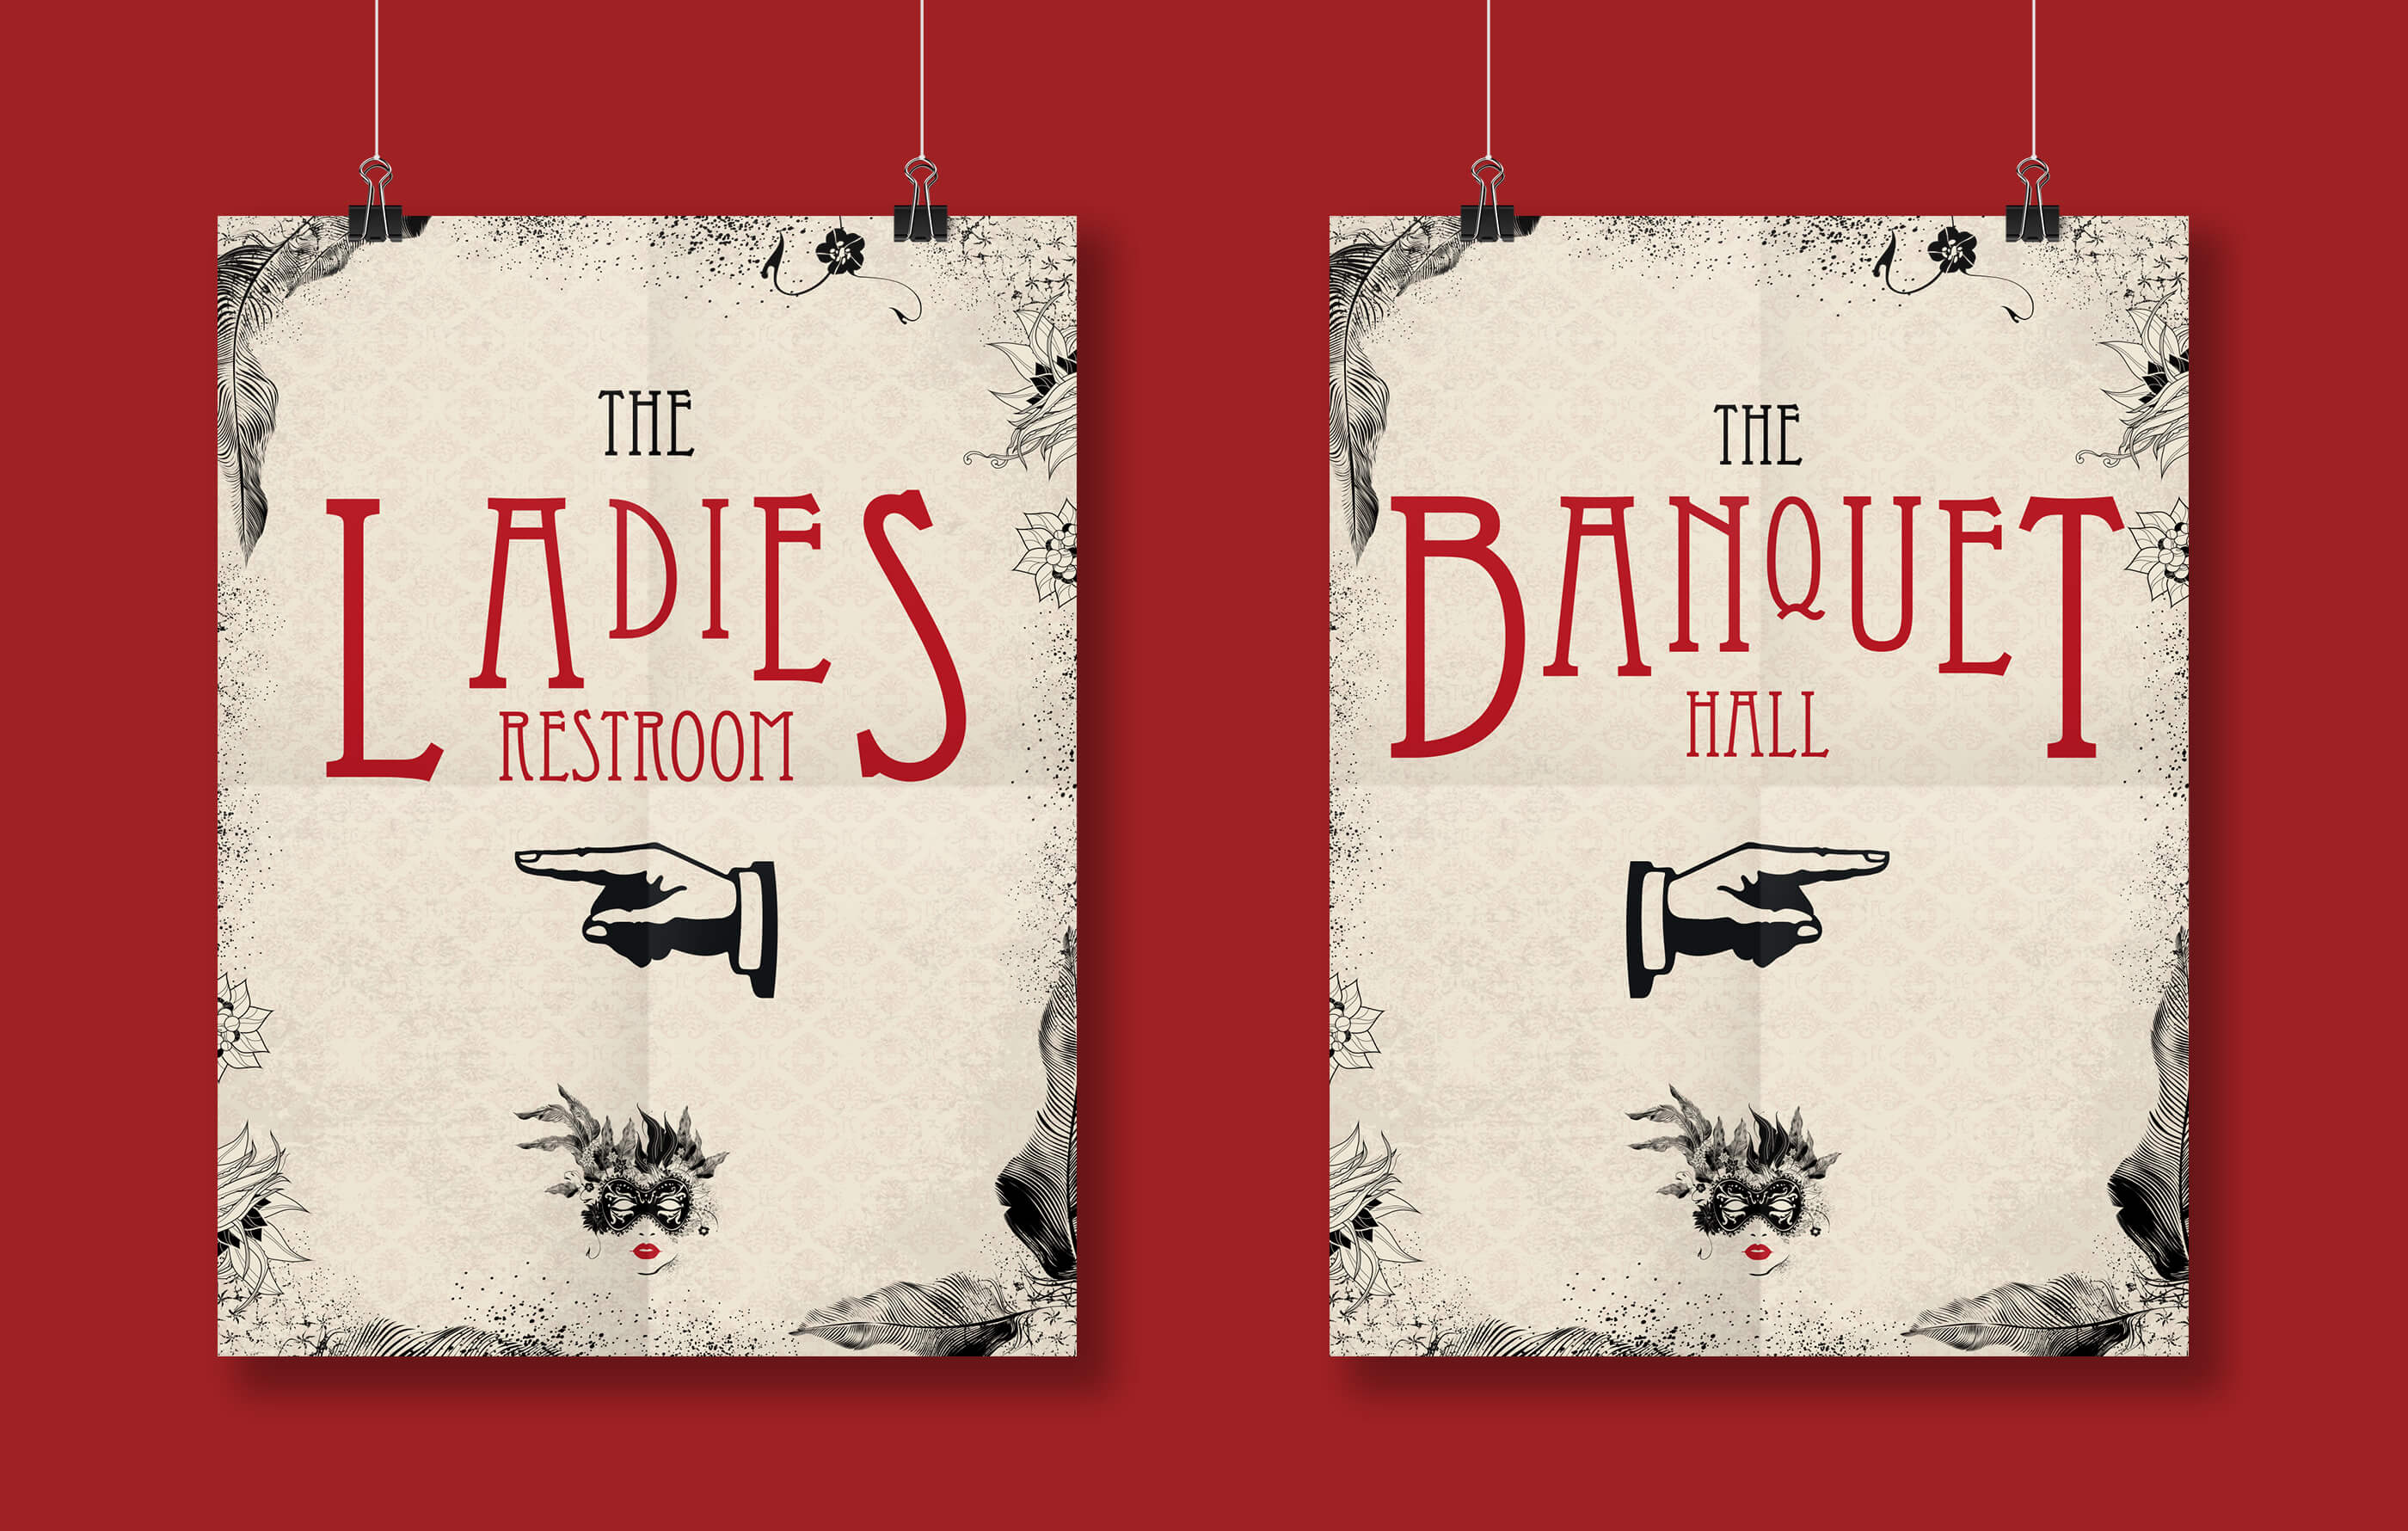 Two hanging poster desings on a red background, directing guests to the ladies restroom on the left and banquet hall on the right